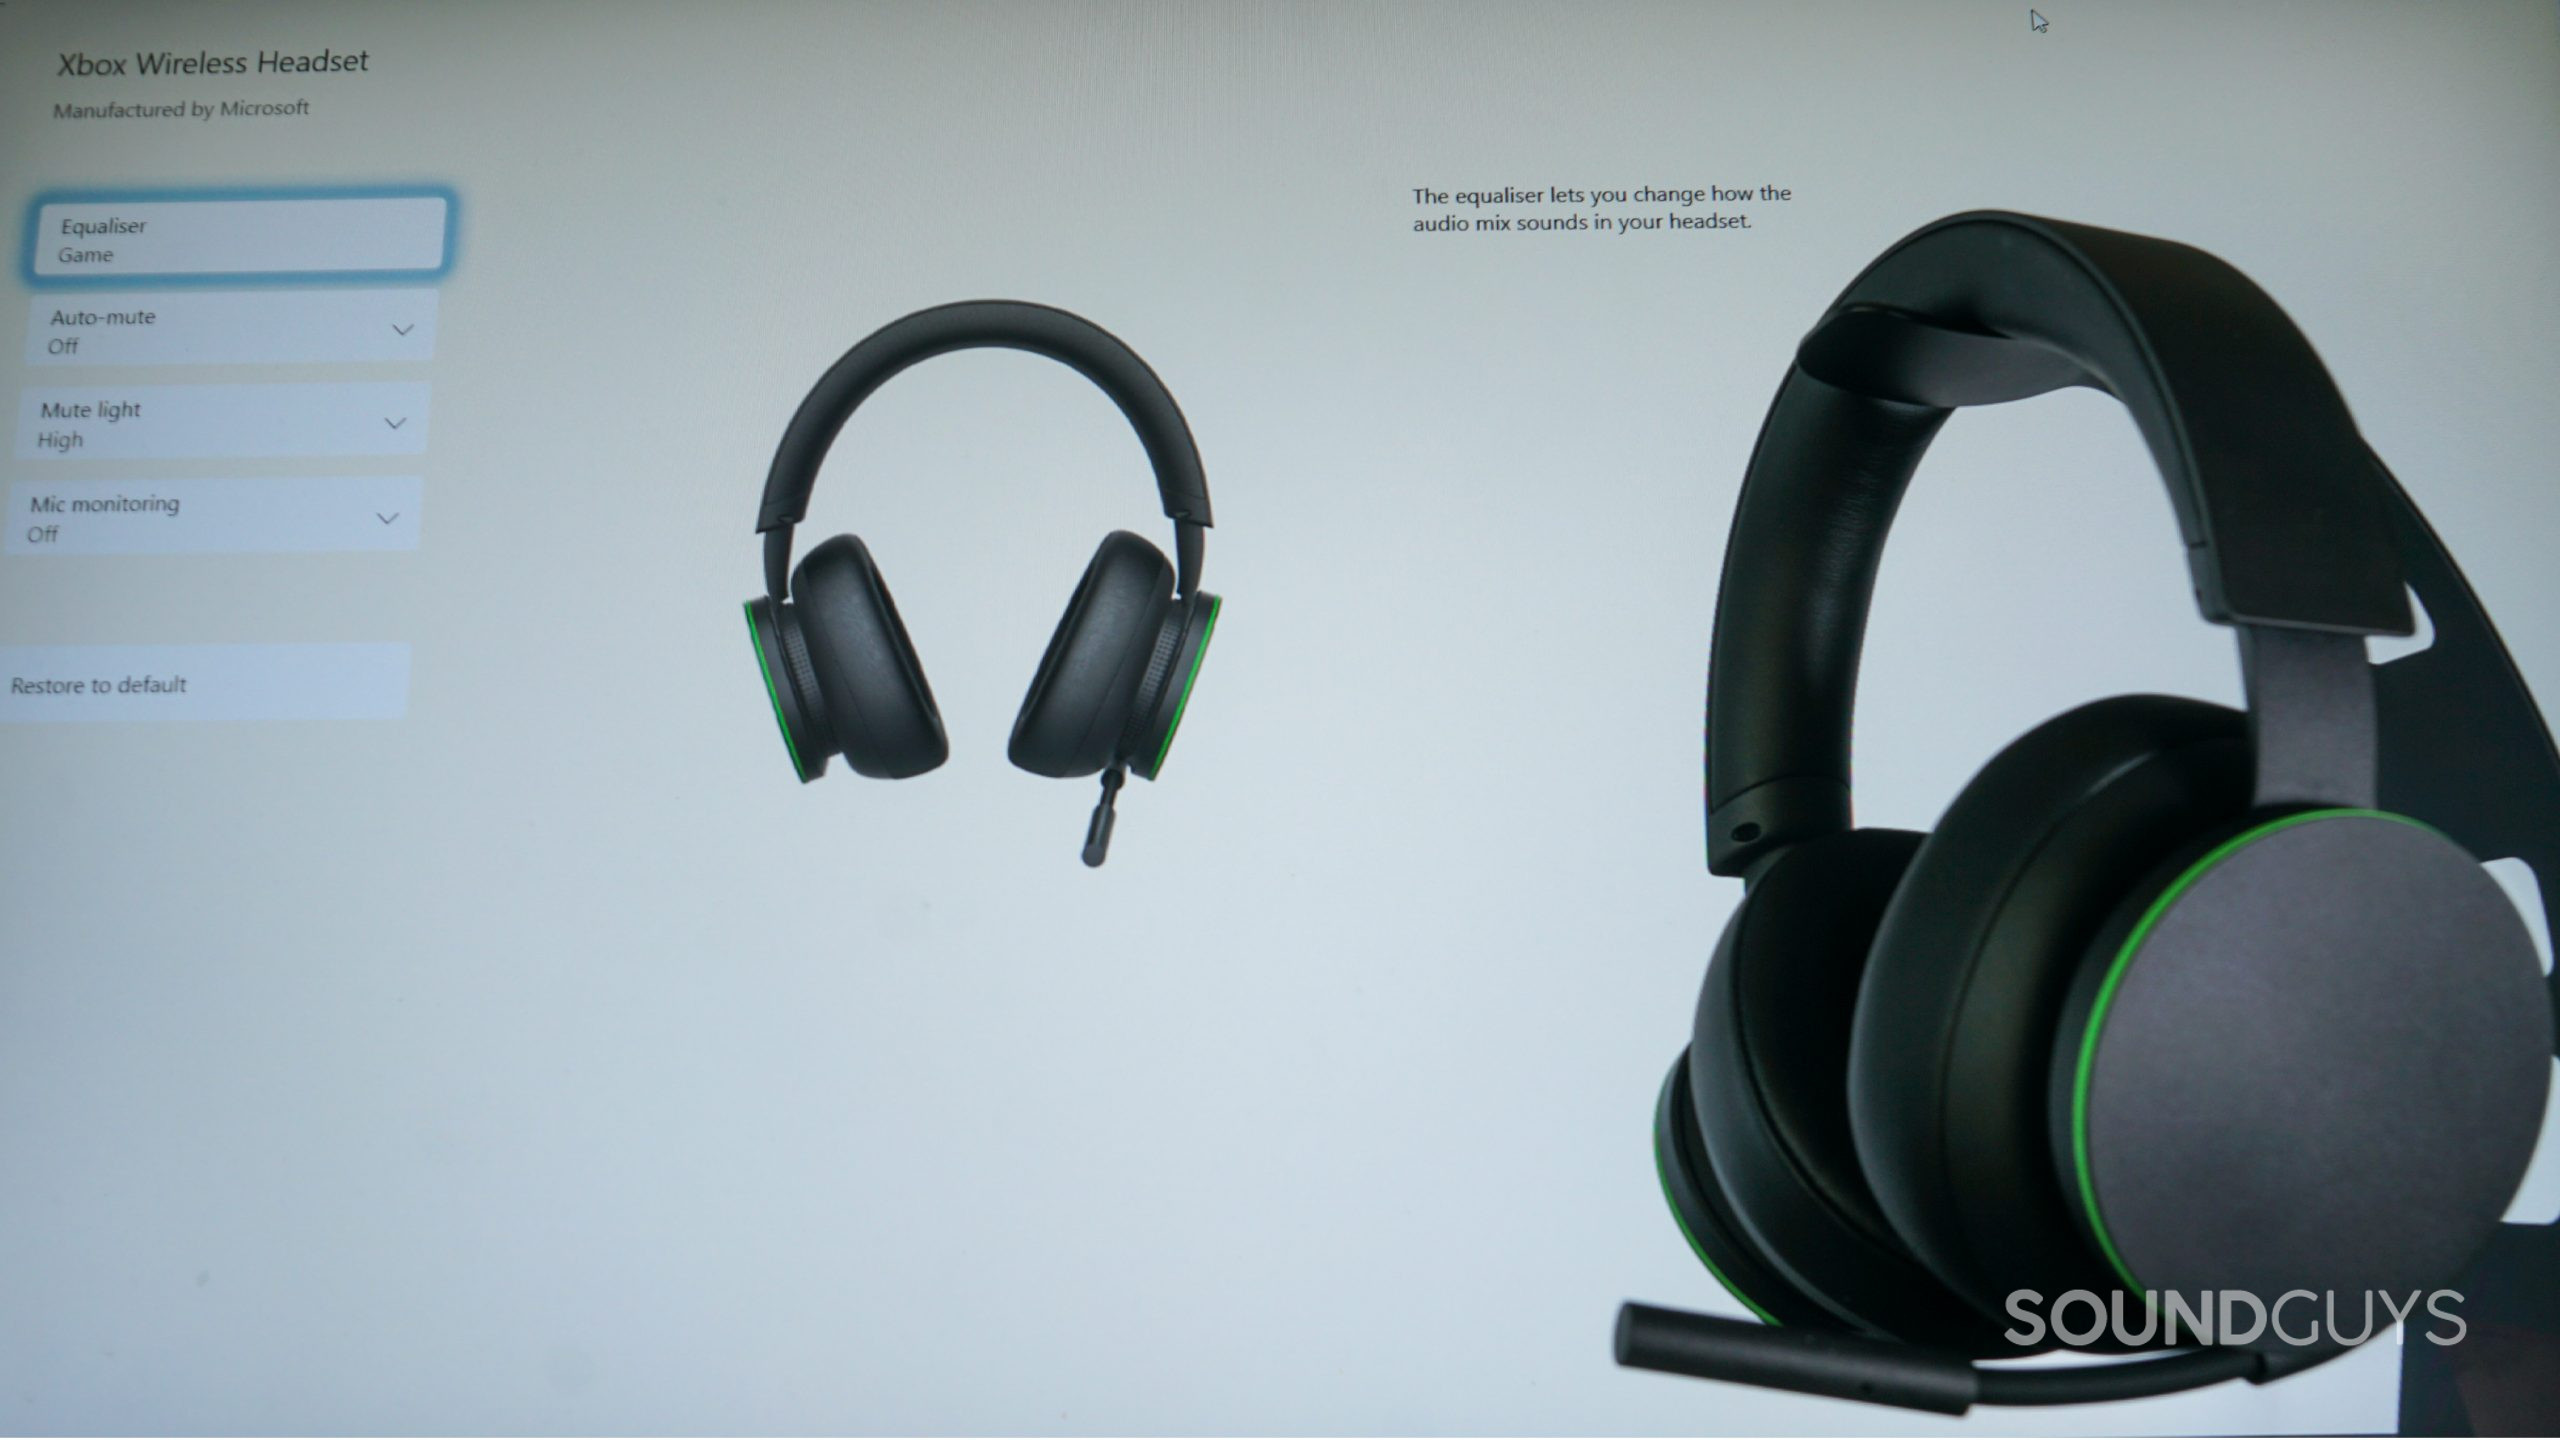 The Microsoft Xbox Wireless Headset sits on a stand in front of a Viewsonic monitor running the Xbox Accessories Windows desktop app.